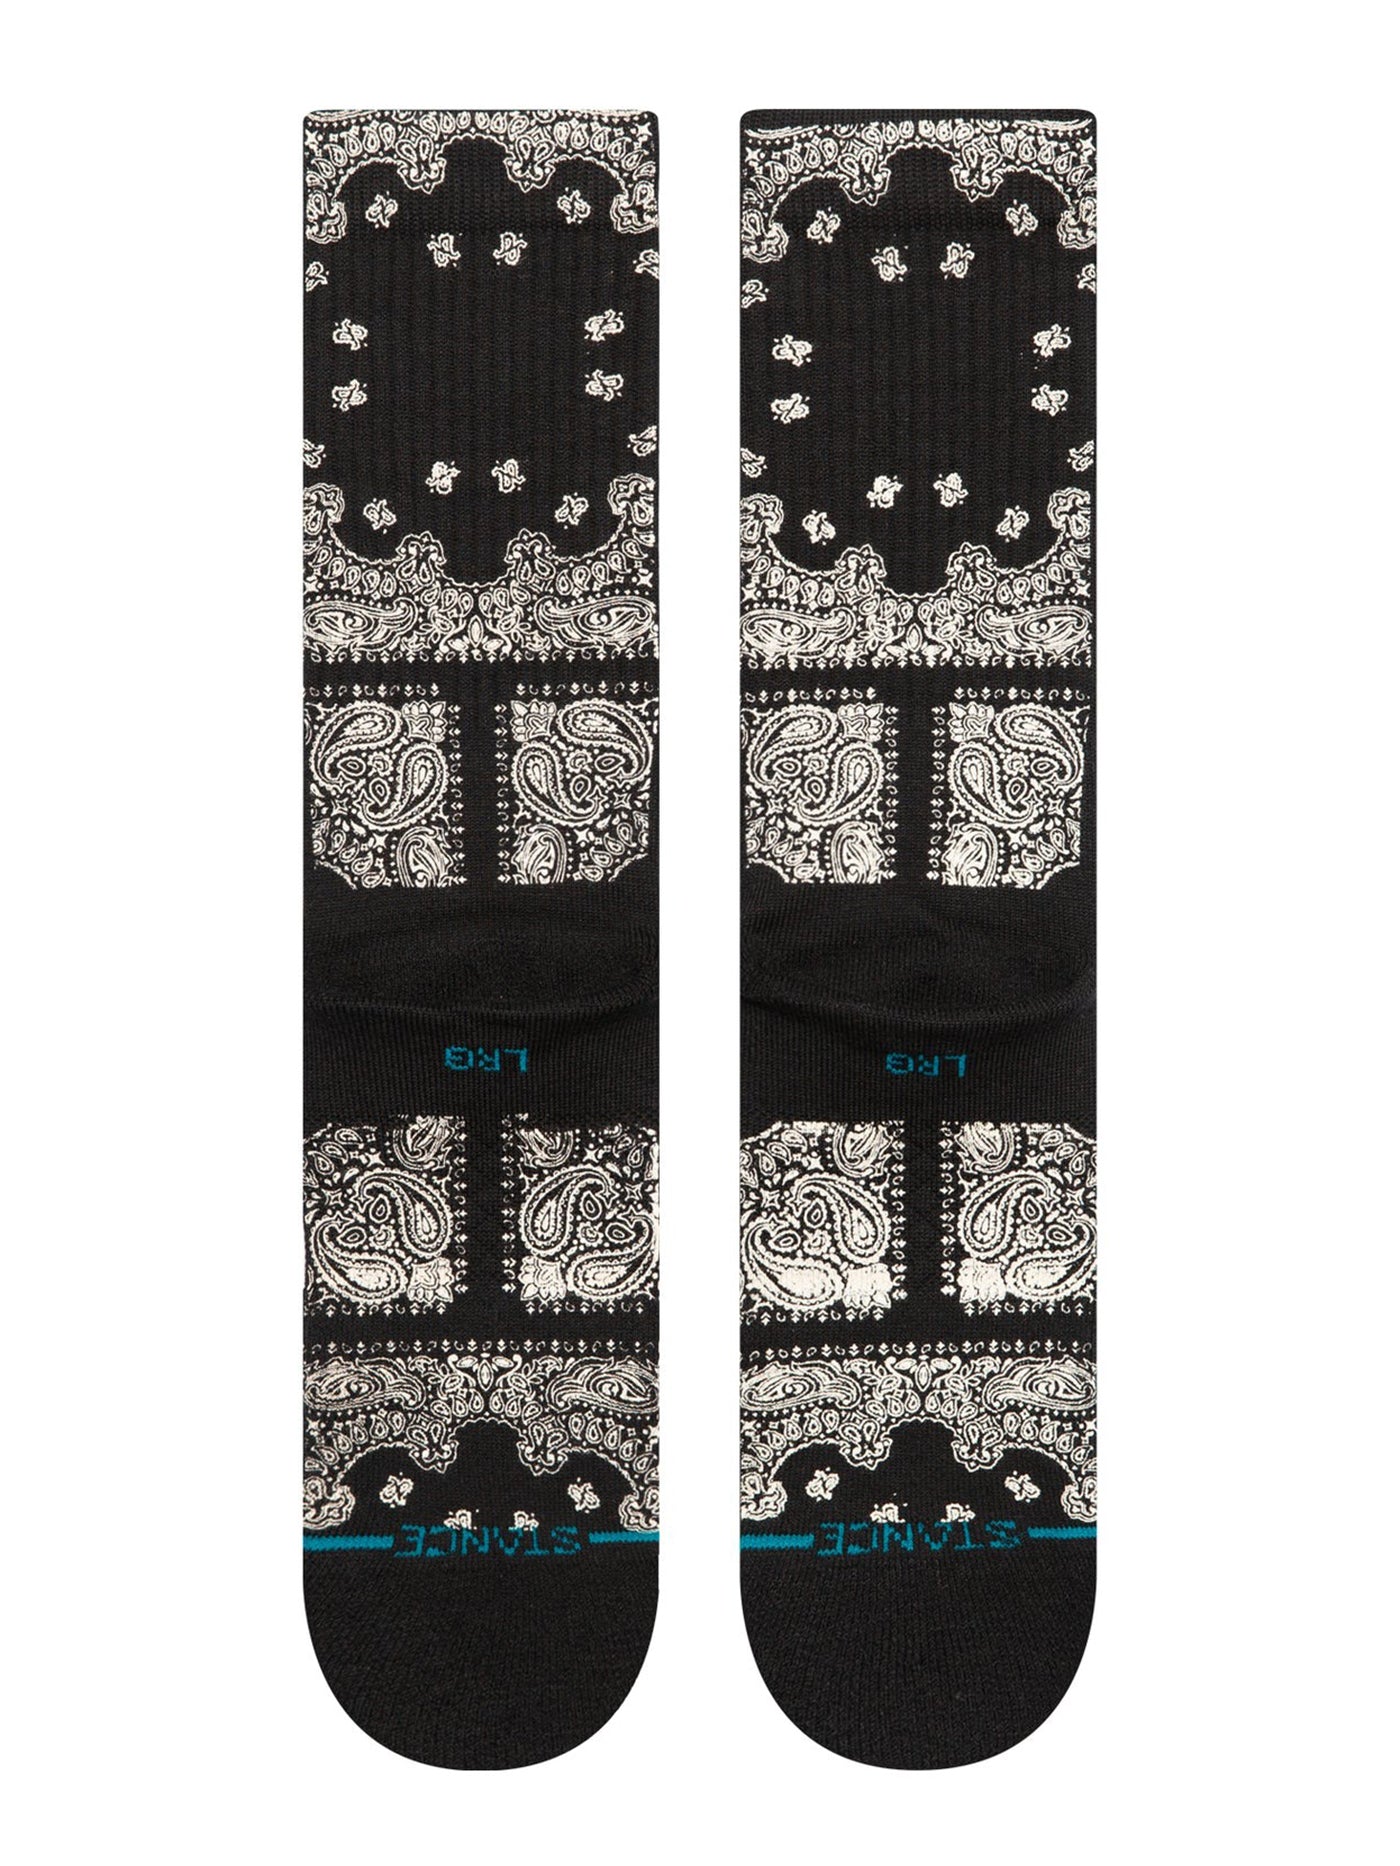 Stance Lonesome Town Socks